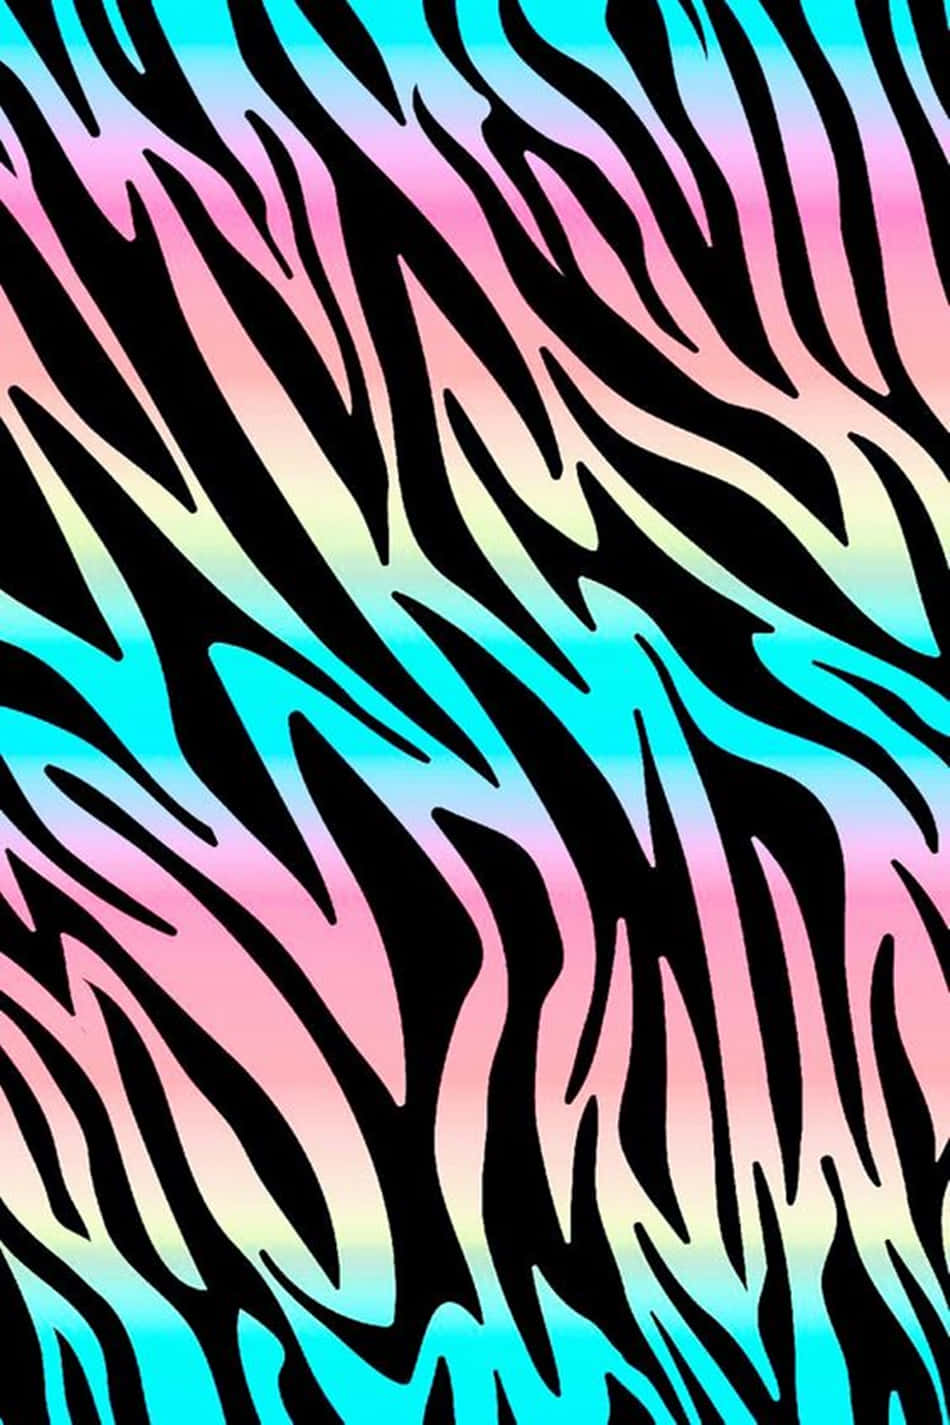 "Animal print adds wild style to any look!" Wallpaper